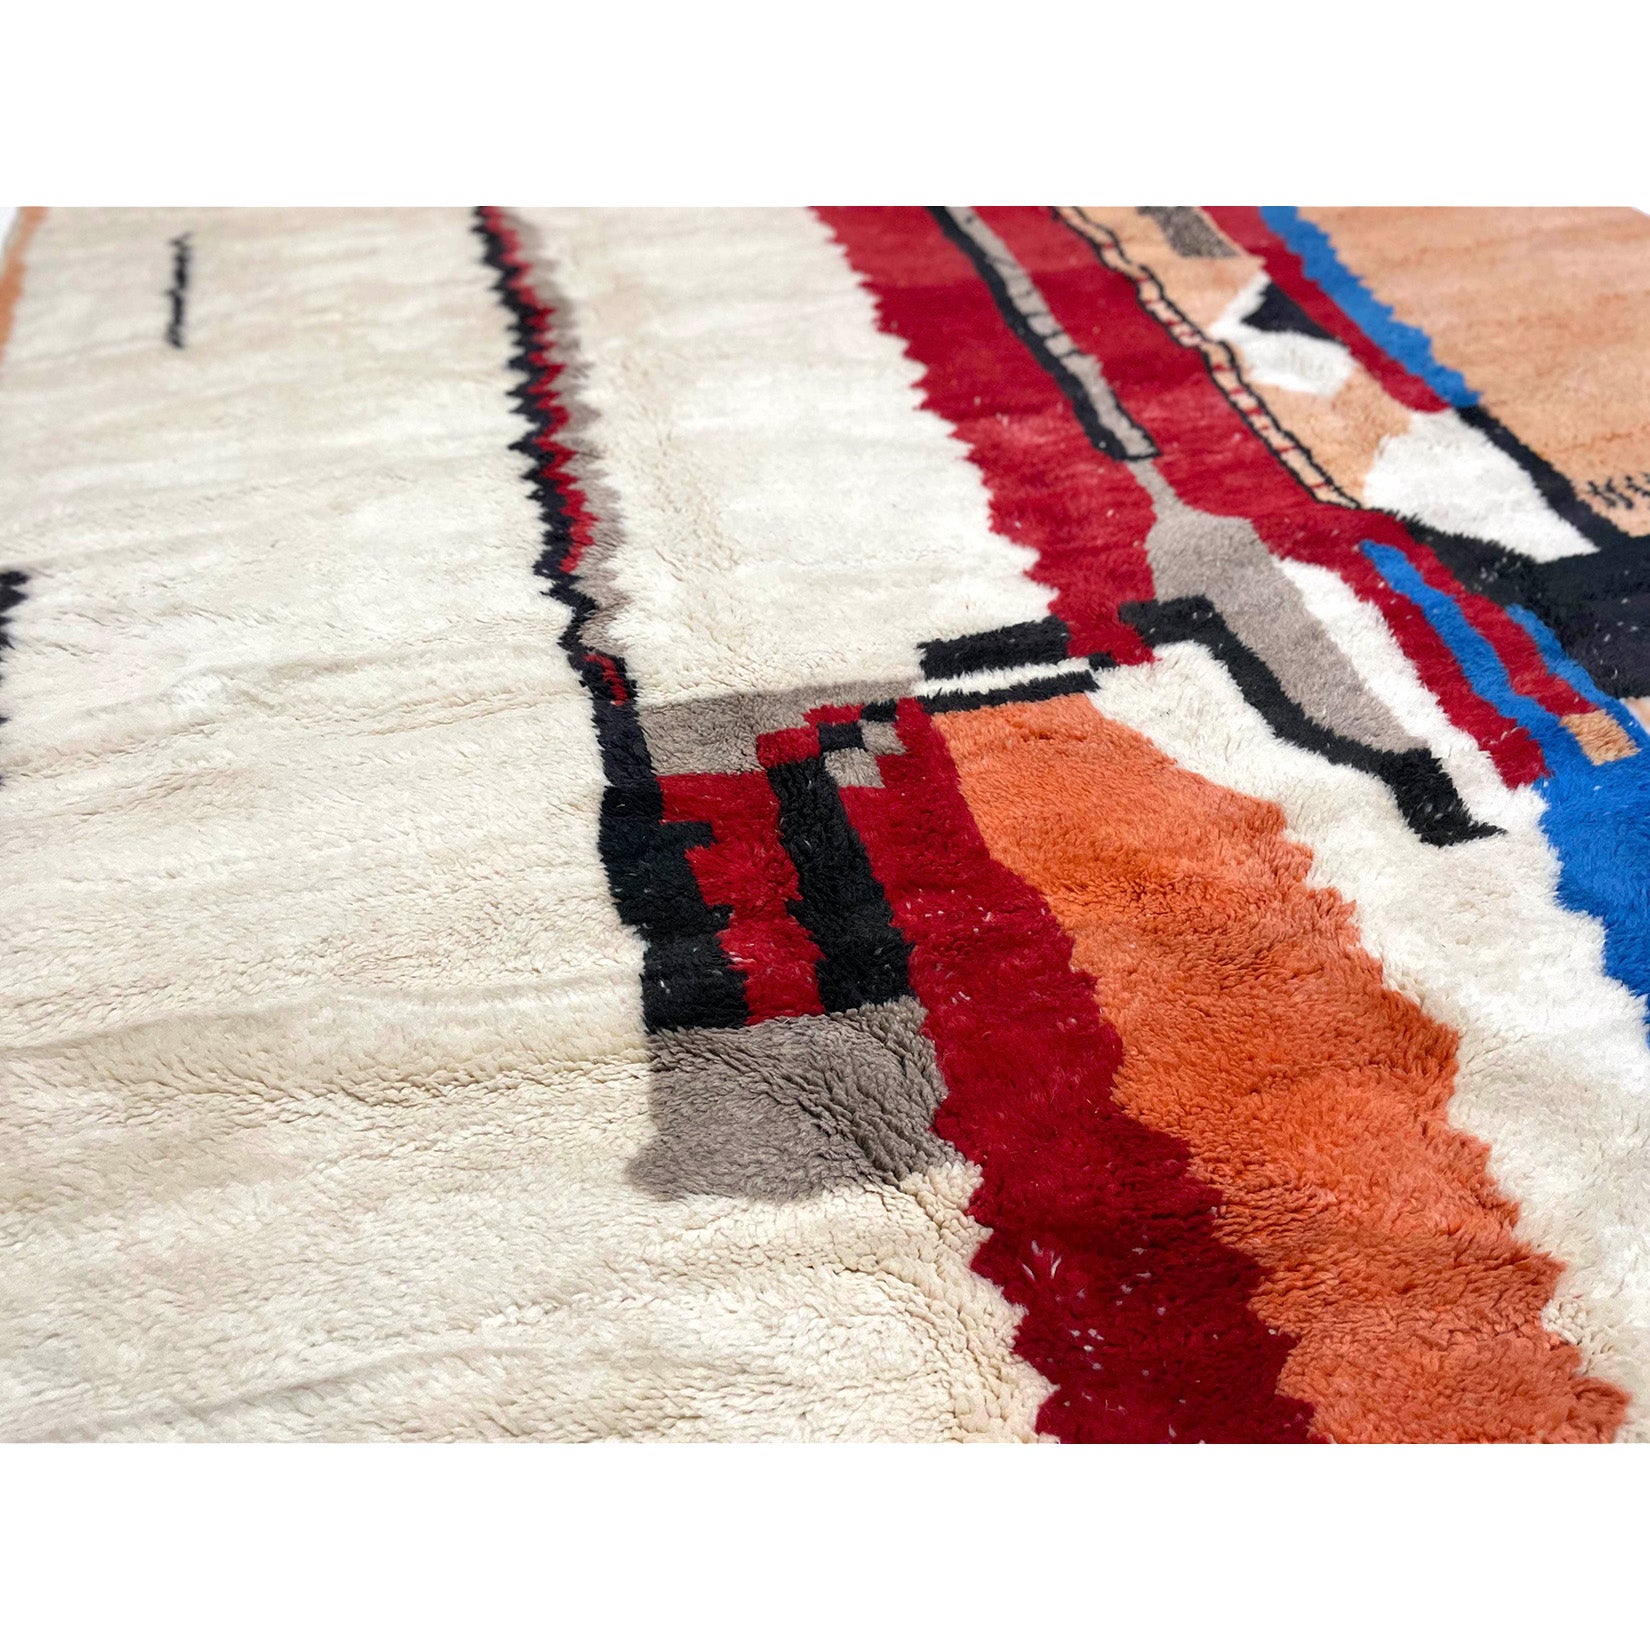 Colorful Moroccan rug in white, red, orange, blue, and grey - Kantara | Moroccan Rugs